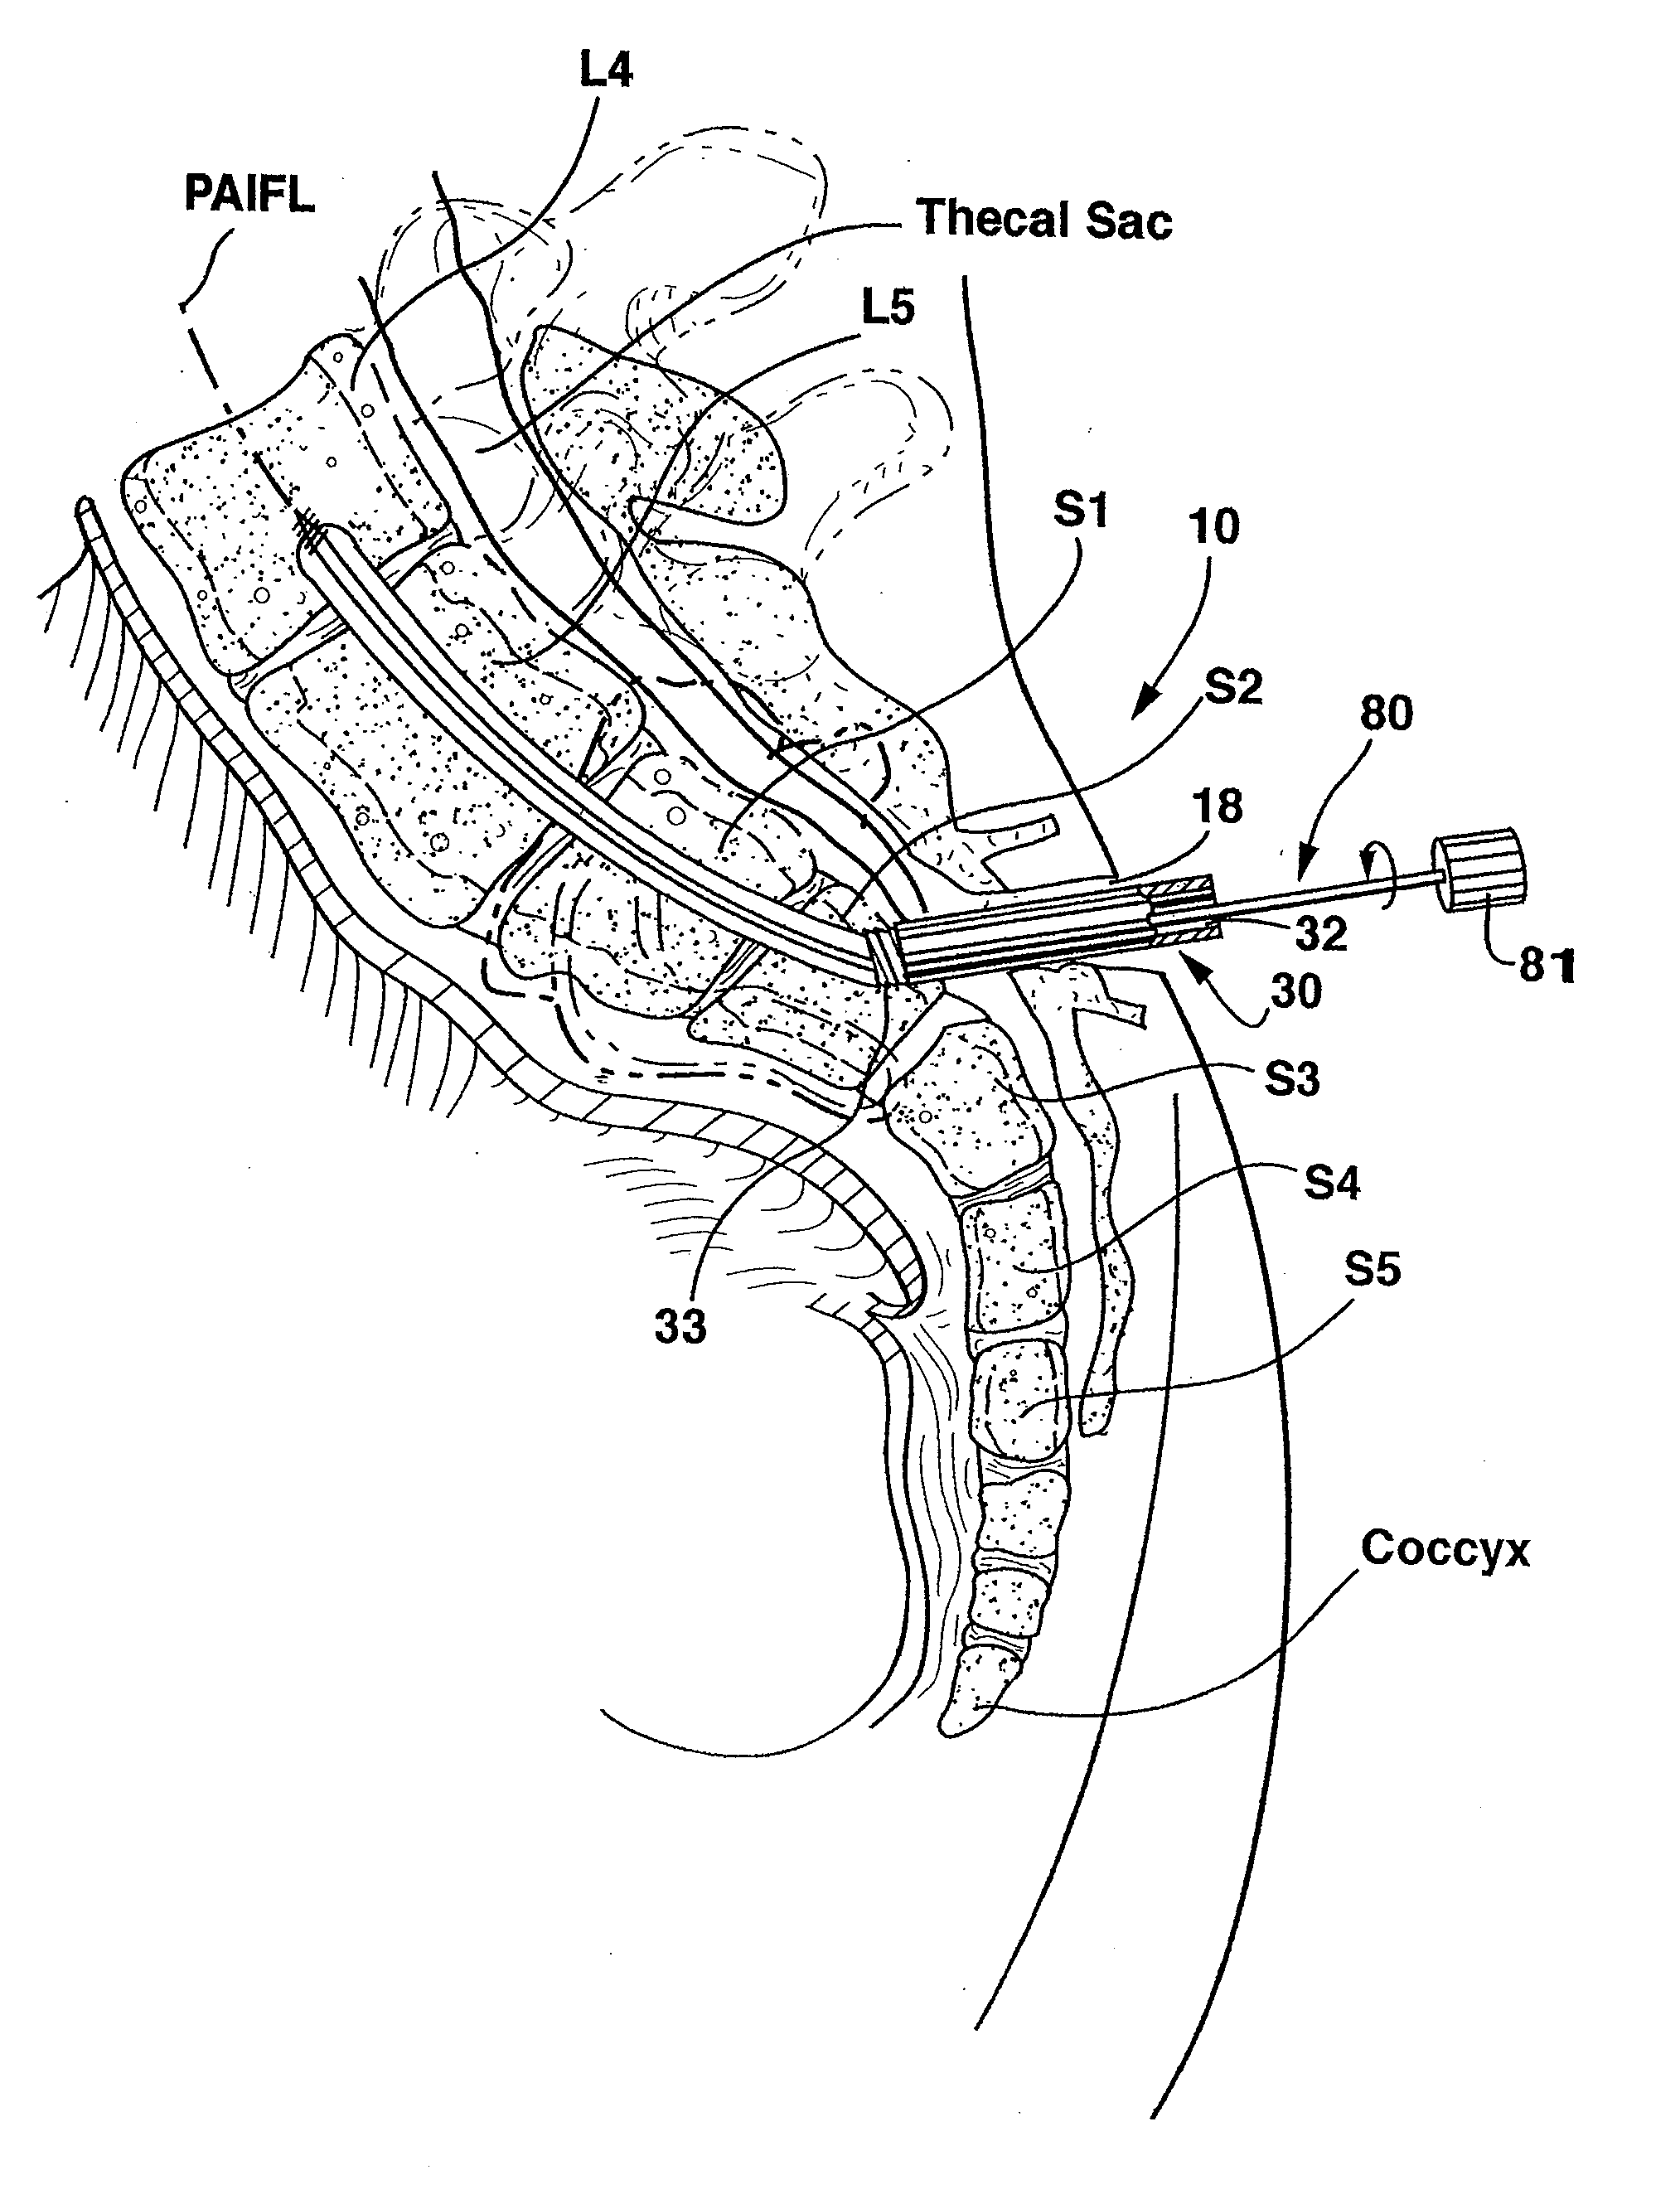 Method and apparatus for providing posterior or anterior trans-sacral access to spinal vertebrae